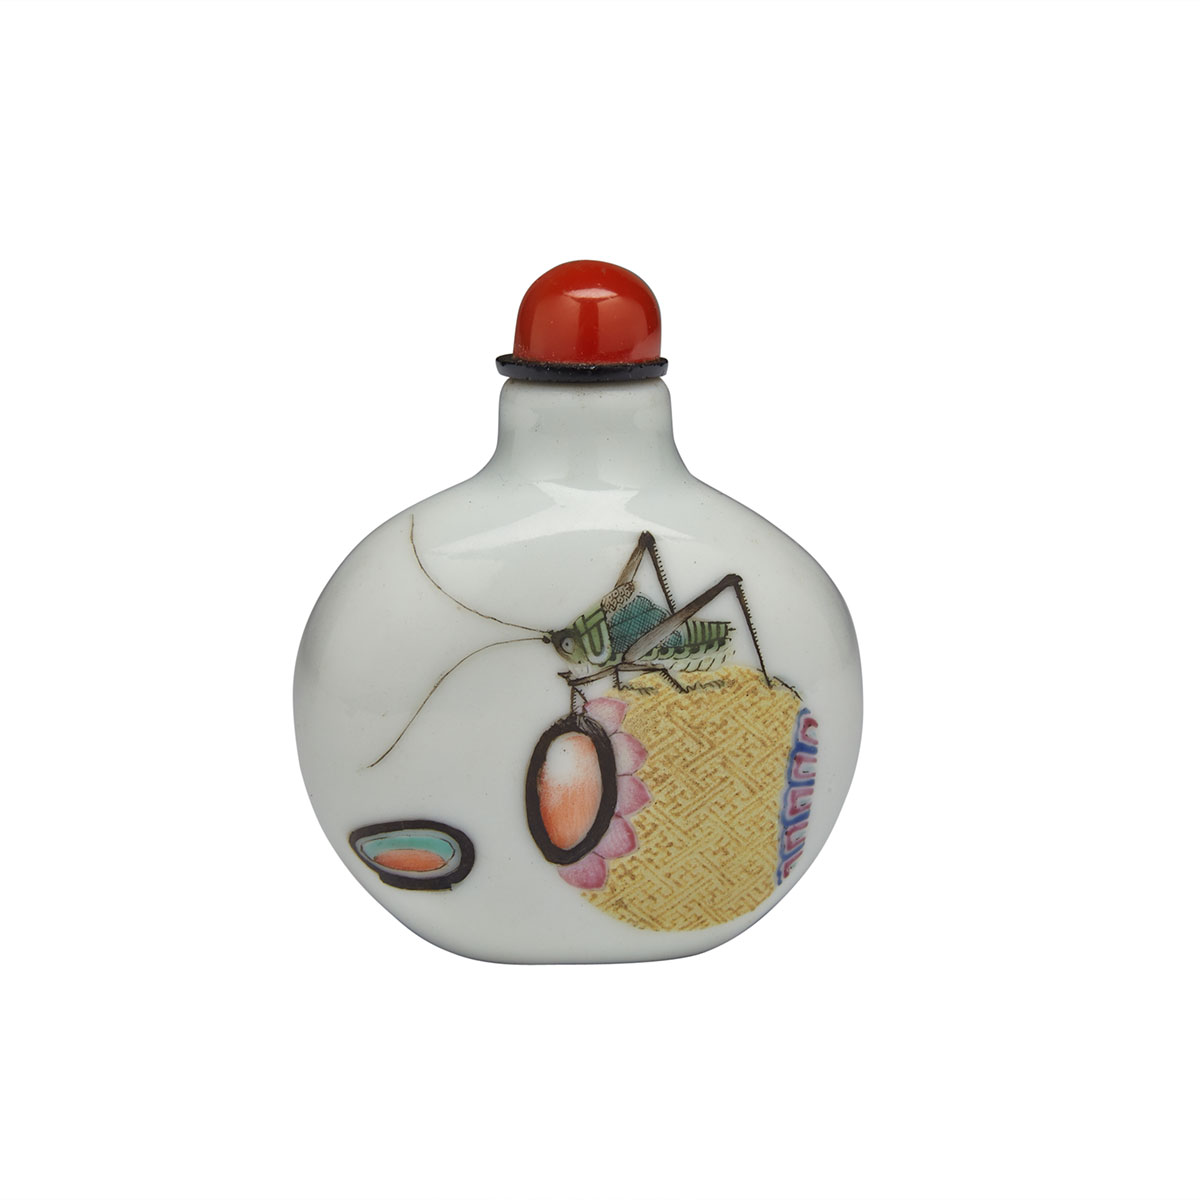 Famille Rose ‘Cricket’ Snuff Bottle, Daoguang Mark and Period (1821-1850)